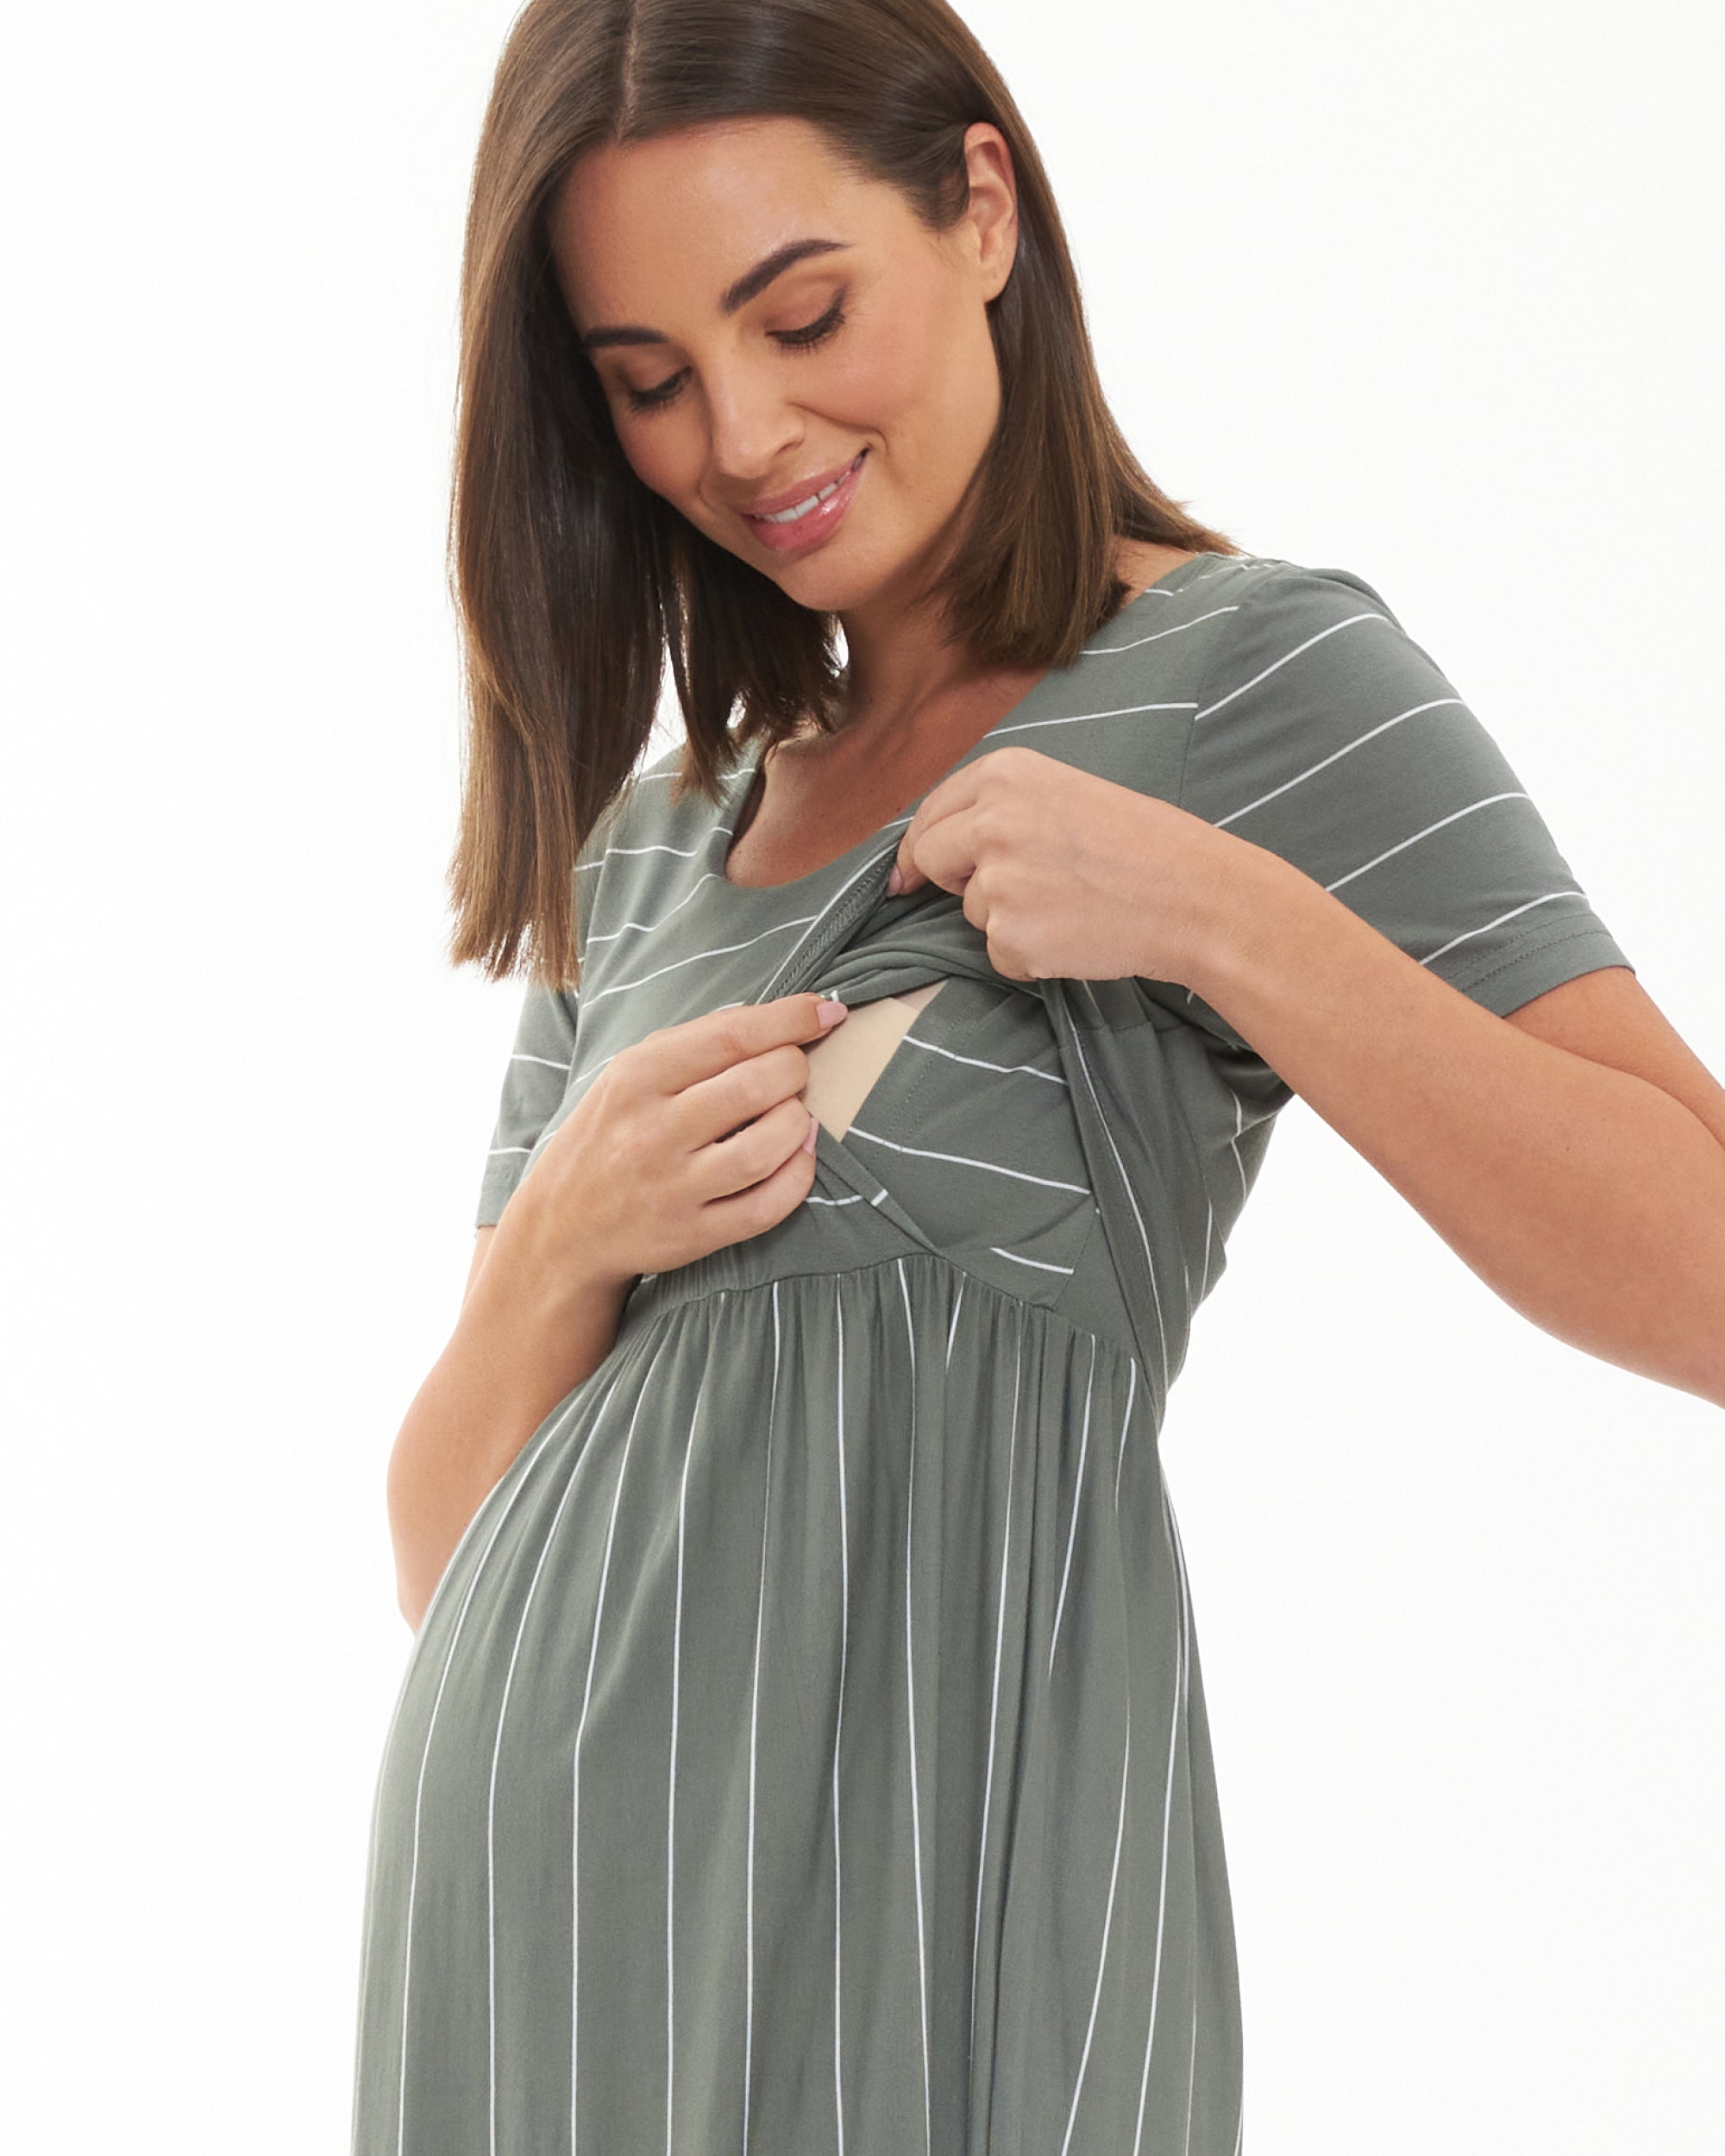 Maternity Stripes Clothing - Gorgeous Maternity Clothes with Stripes